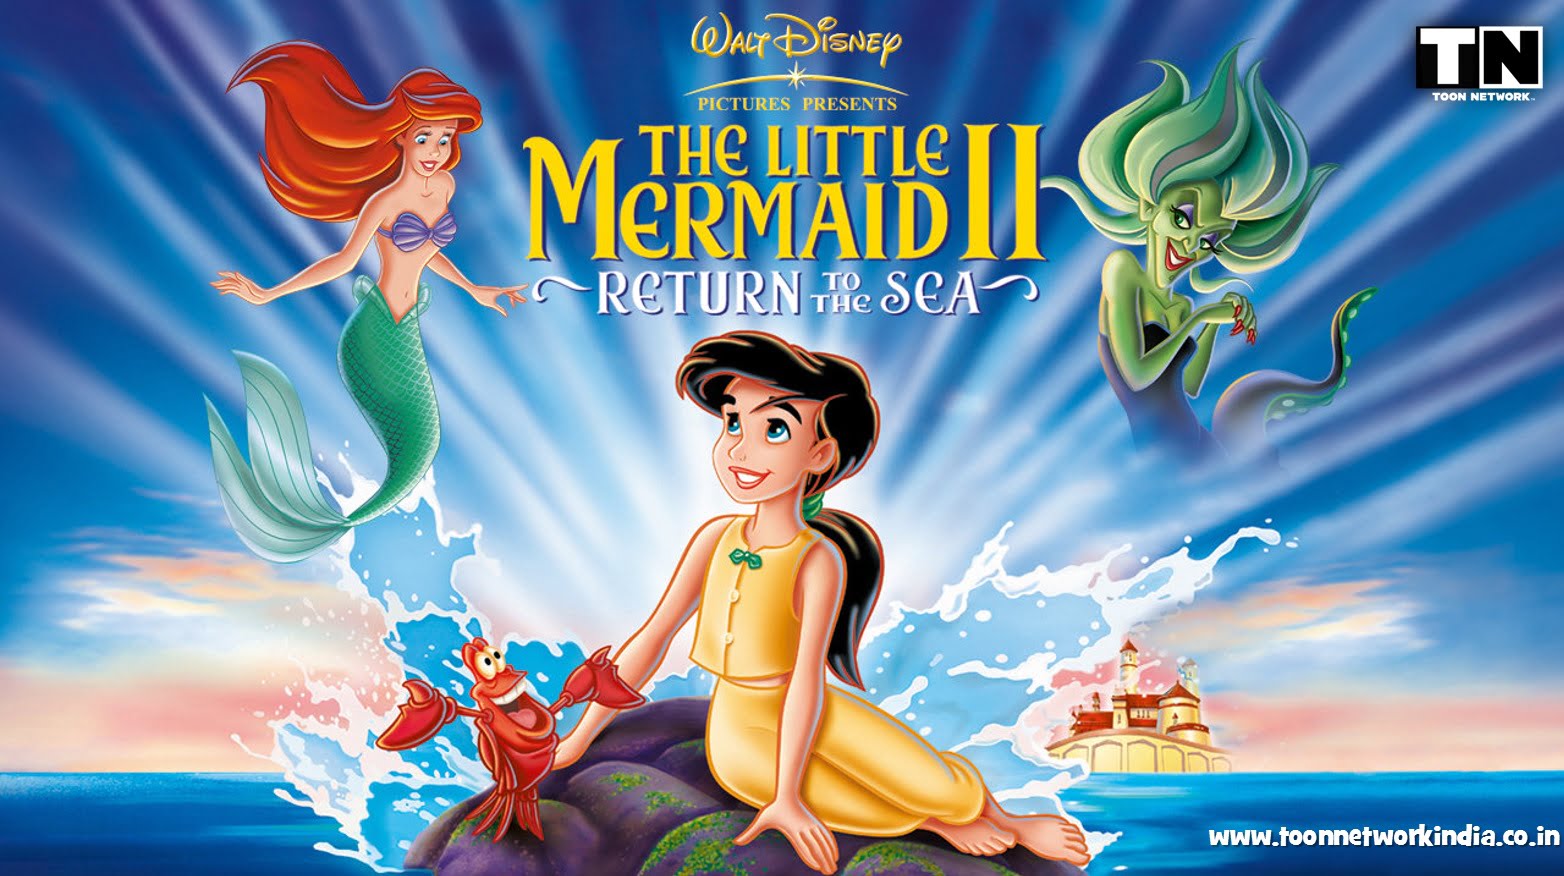 Download The Little Mermaid Return To The Sea Free chasahsh :: A Wife